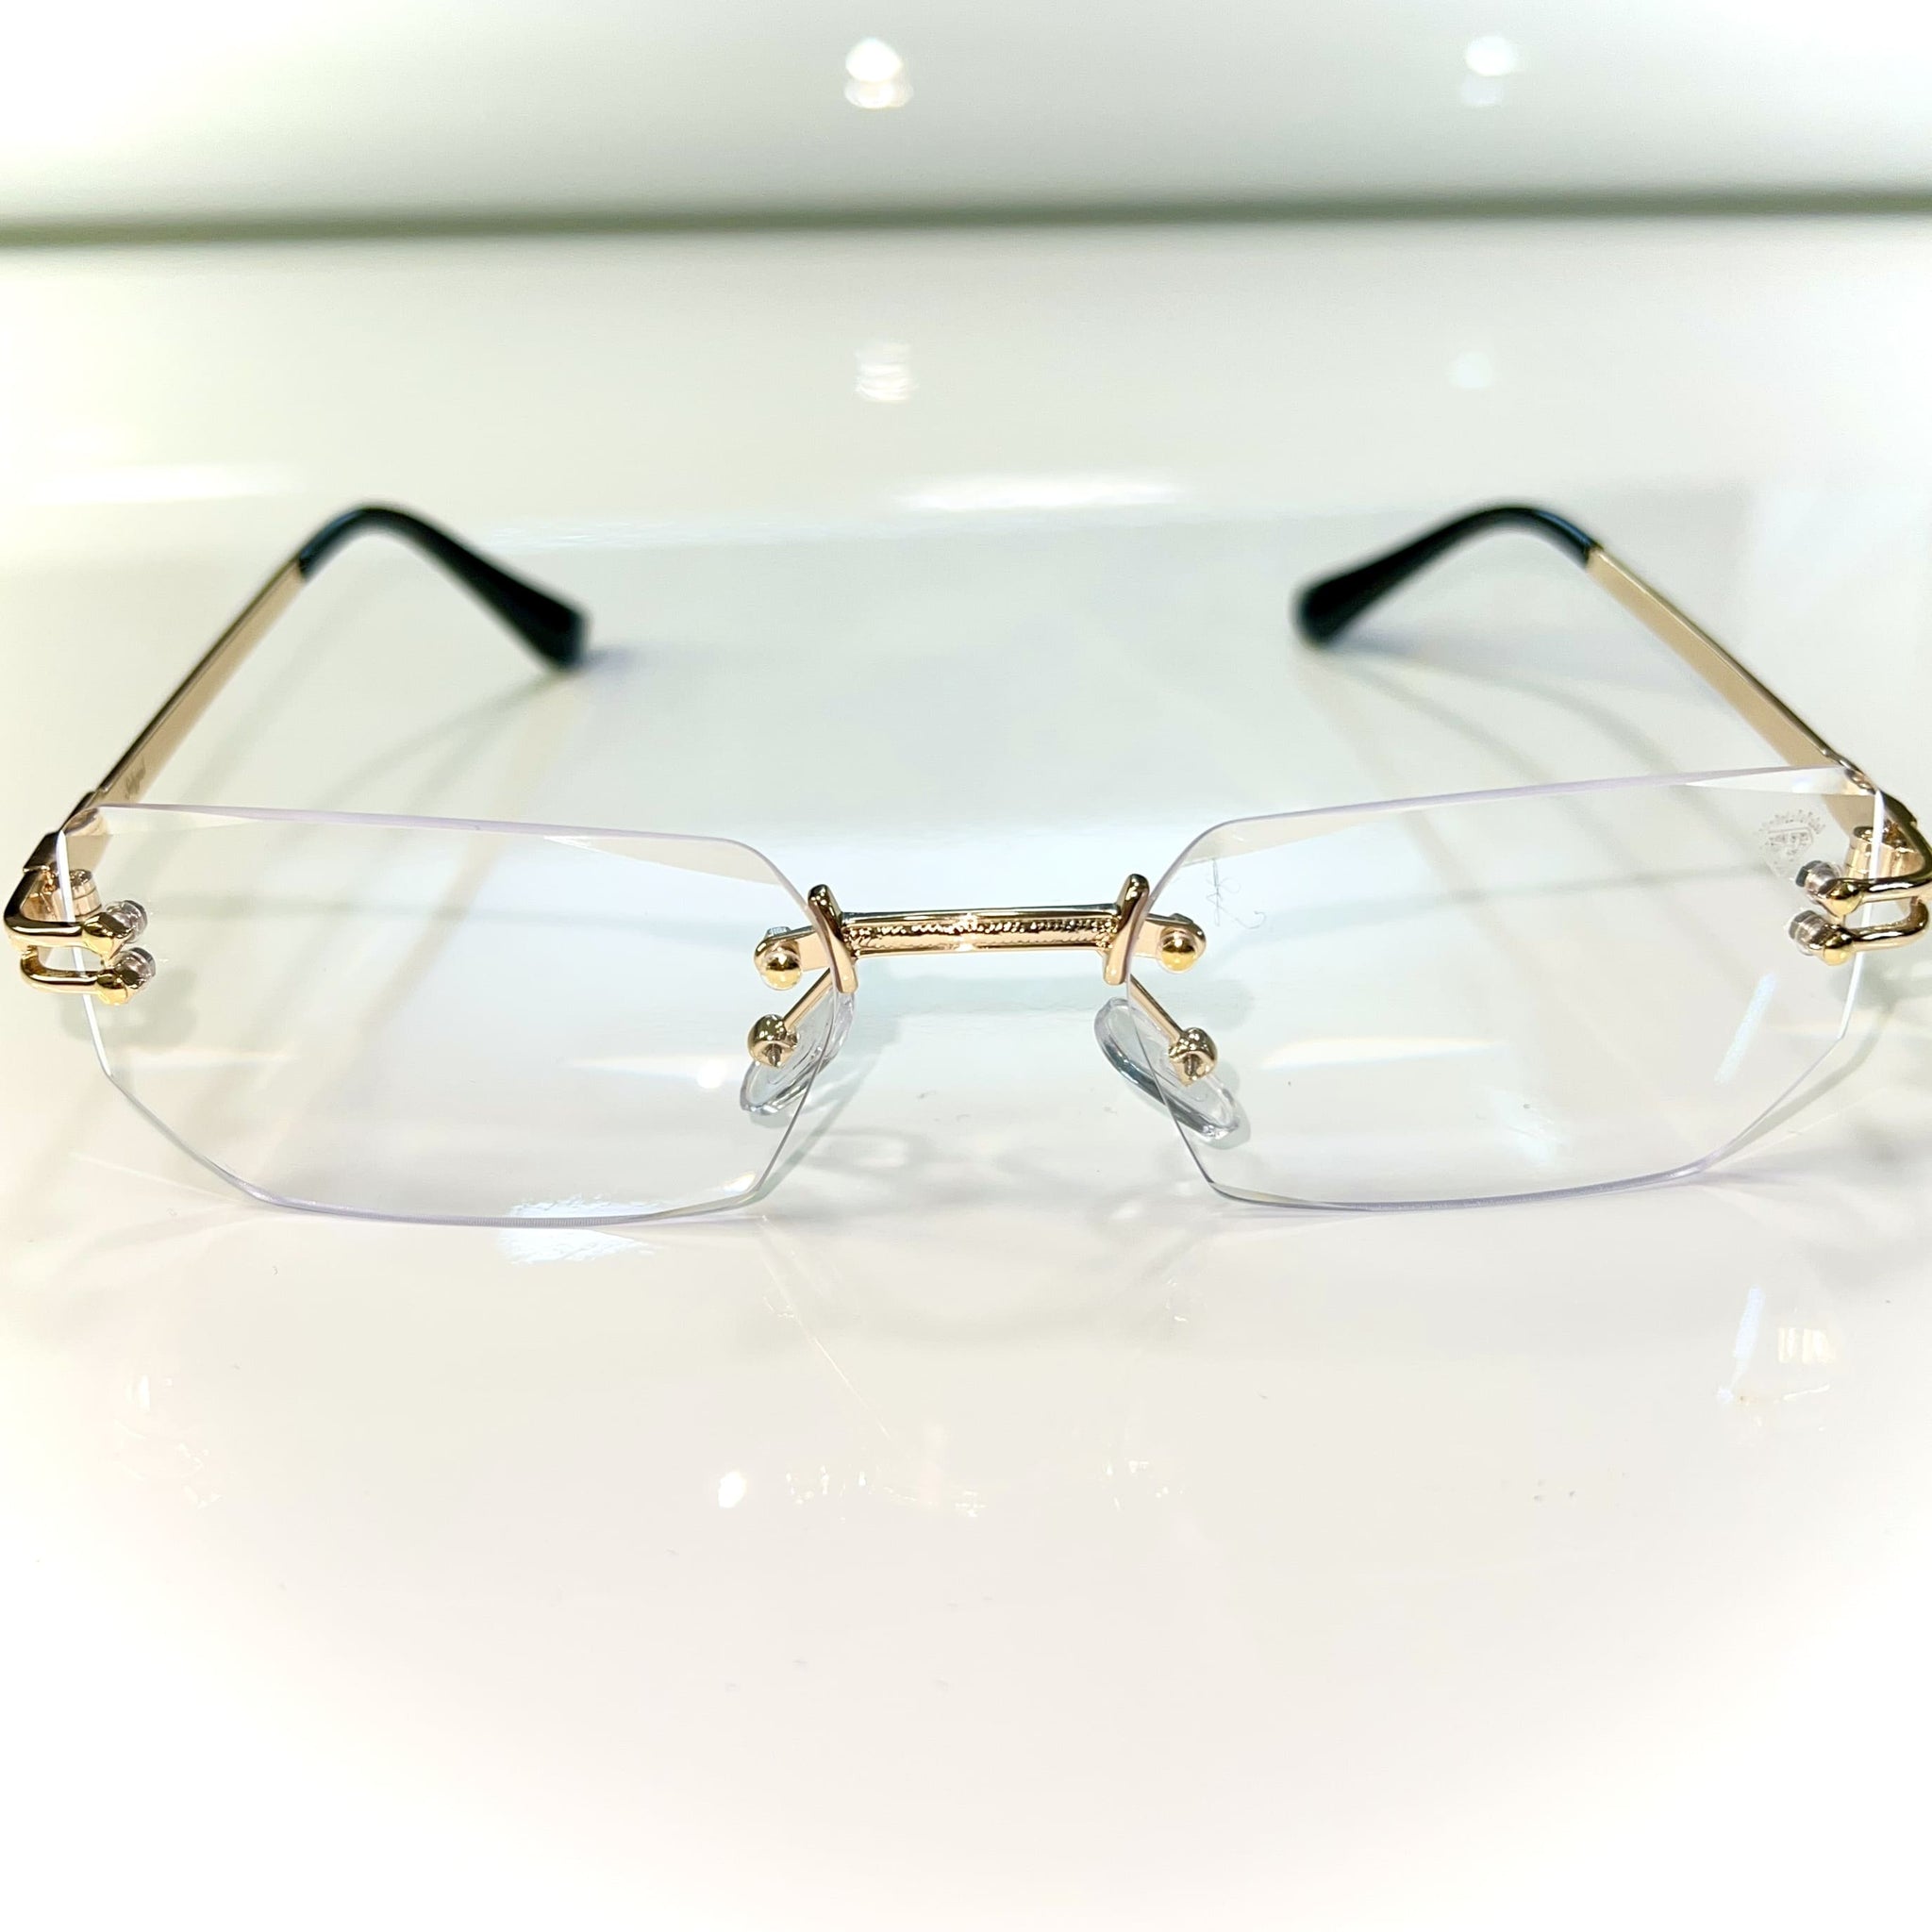 Rich Glasses - 14k gold plated - Sehgal Glasses - Transparent Shade / Gold Frame - Transparent Collection